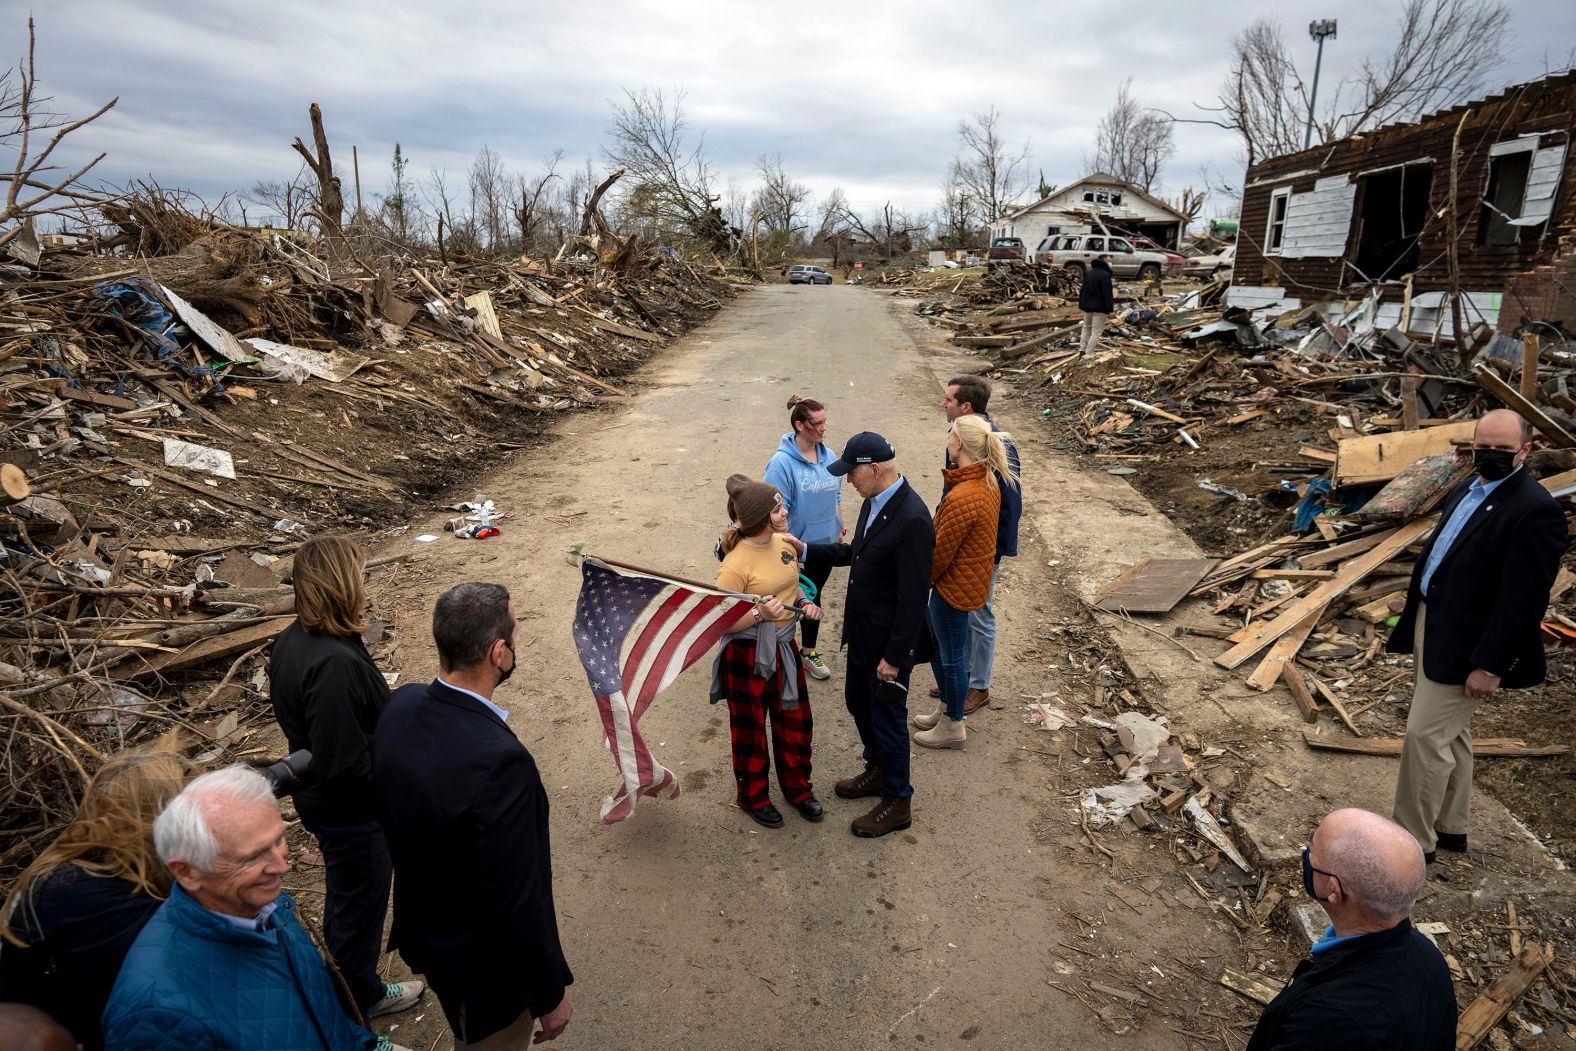 Biden speaks with a person holding an American flag as he tours tornado damage in Dawson Springs, Kentucky, on December 15.<br /><br />Dozens of people were killed after a <a href="https://www.cnn.com/2021/12/11/weather/gallery/midwest-tornadoes-damage/index.html" target="_blank">tornado outbreak</a> flattened homes and businesses across eight states in the Midwest and South. Many of the victims were in western Kentucky.<br /><br />"As (Biden) walked down this street, a young girl stood with an American flag not far from where her house once stood," New York Times photographer Doug Mills said. "President Biden asked how she and her family were doing. She explained that her house was destroyed but her family was OK. I could not believe the devastation. It went on as far as you could see."  <br /><br />The President announced that day that the federal government <a href="https://www.cnn.com/2021/12/15/politics/biden-kentucky-visit/index.html" target="_blank">would cover 100% of the costs of emergency work for the first 30 days.</a> That coverage includes shelter, debris removal and the cost of overtime for law enforcement and emergency personnel.